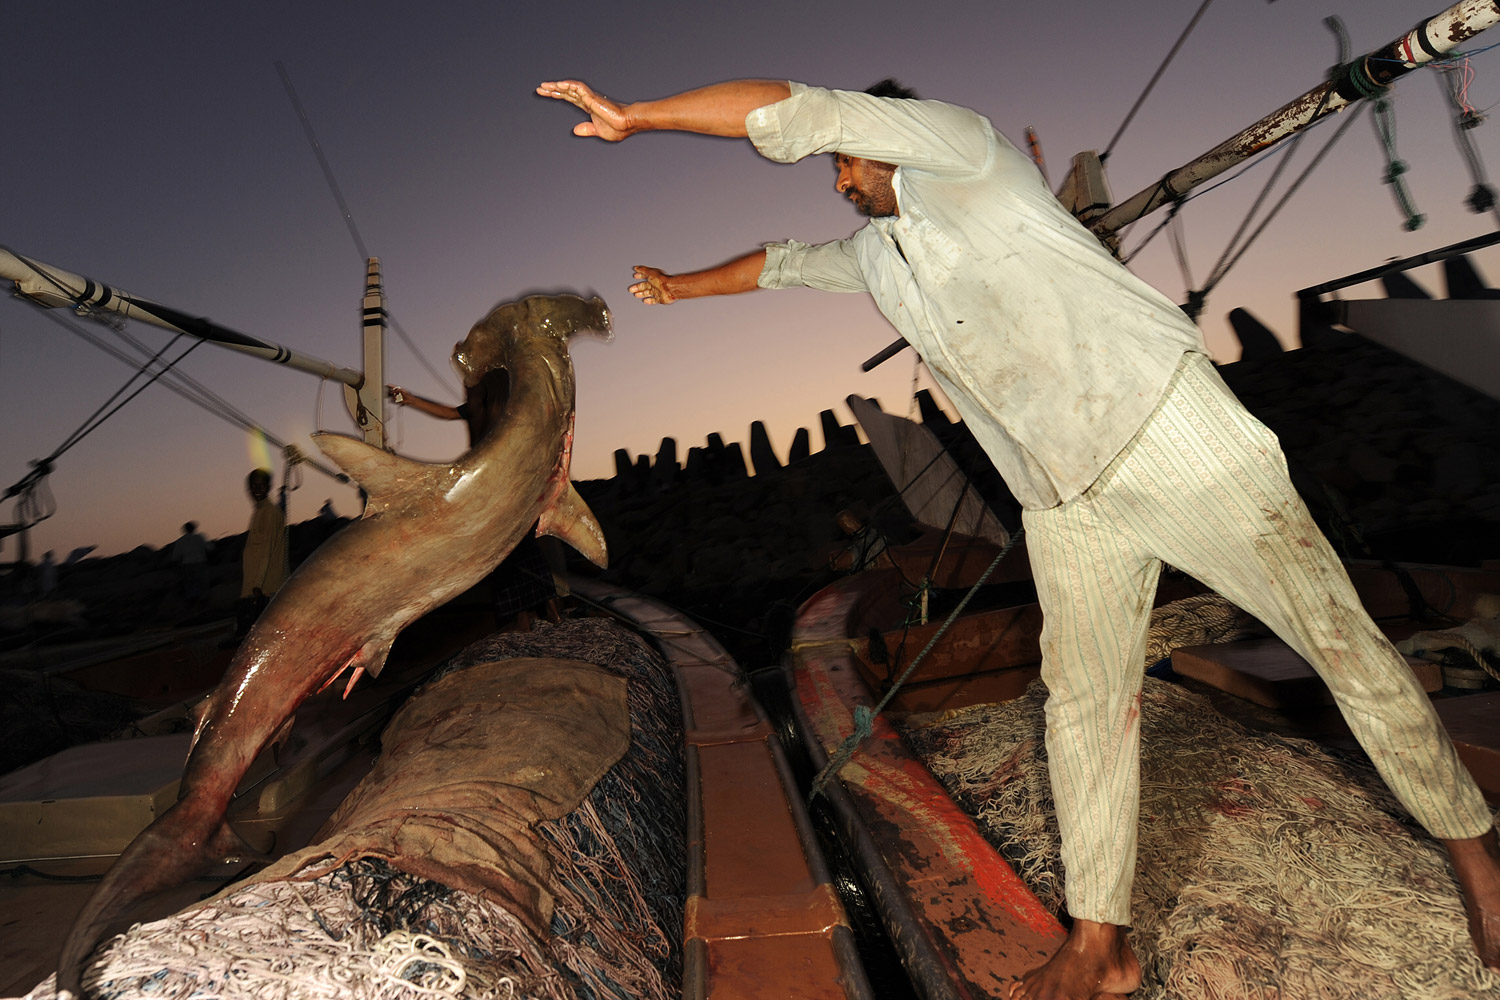 A dockworker tosses a scalloped hammerhead shark from a fishing dhow. Despite this species being listed by IUCN as endangered it continues to be landed in many Arabian ports.